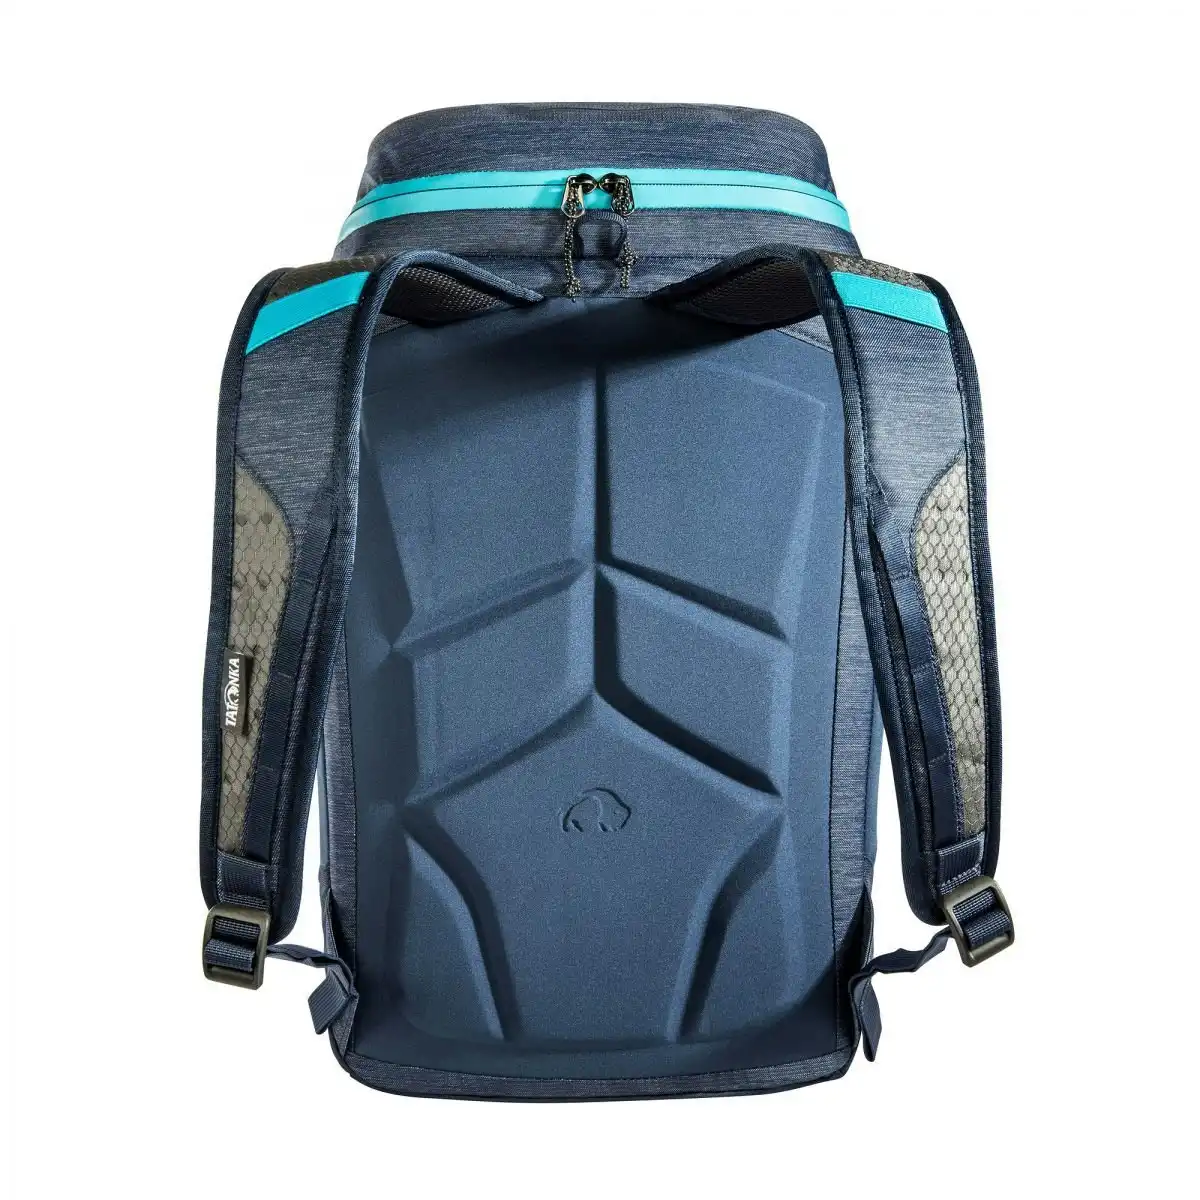 Tatonka City Pack 22L Backpack w/ Hip/Chest Belt Laptop Compartment Storage Navy